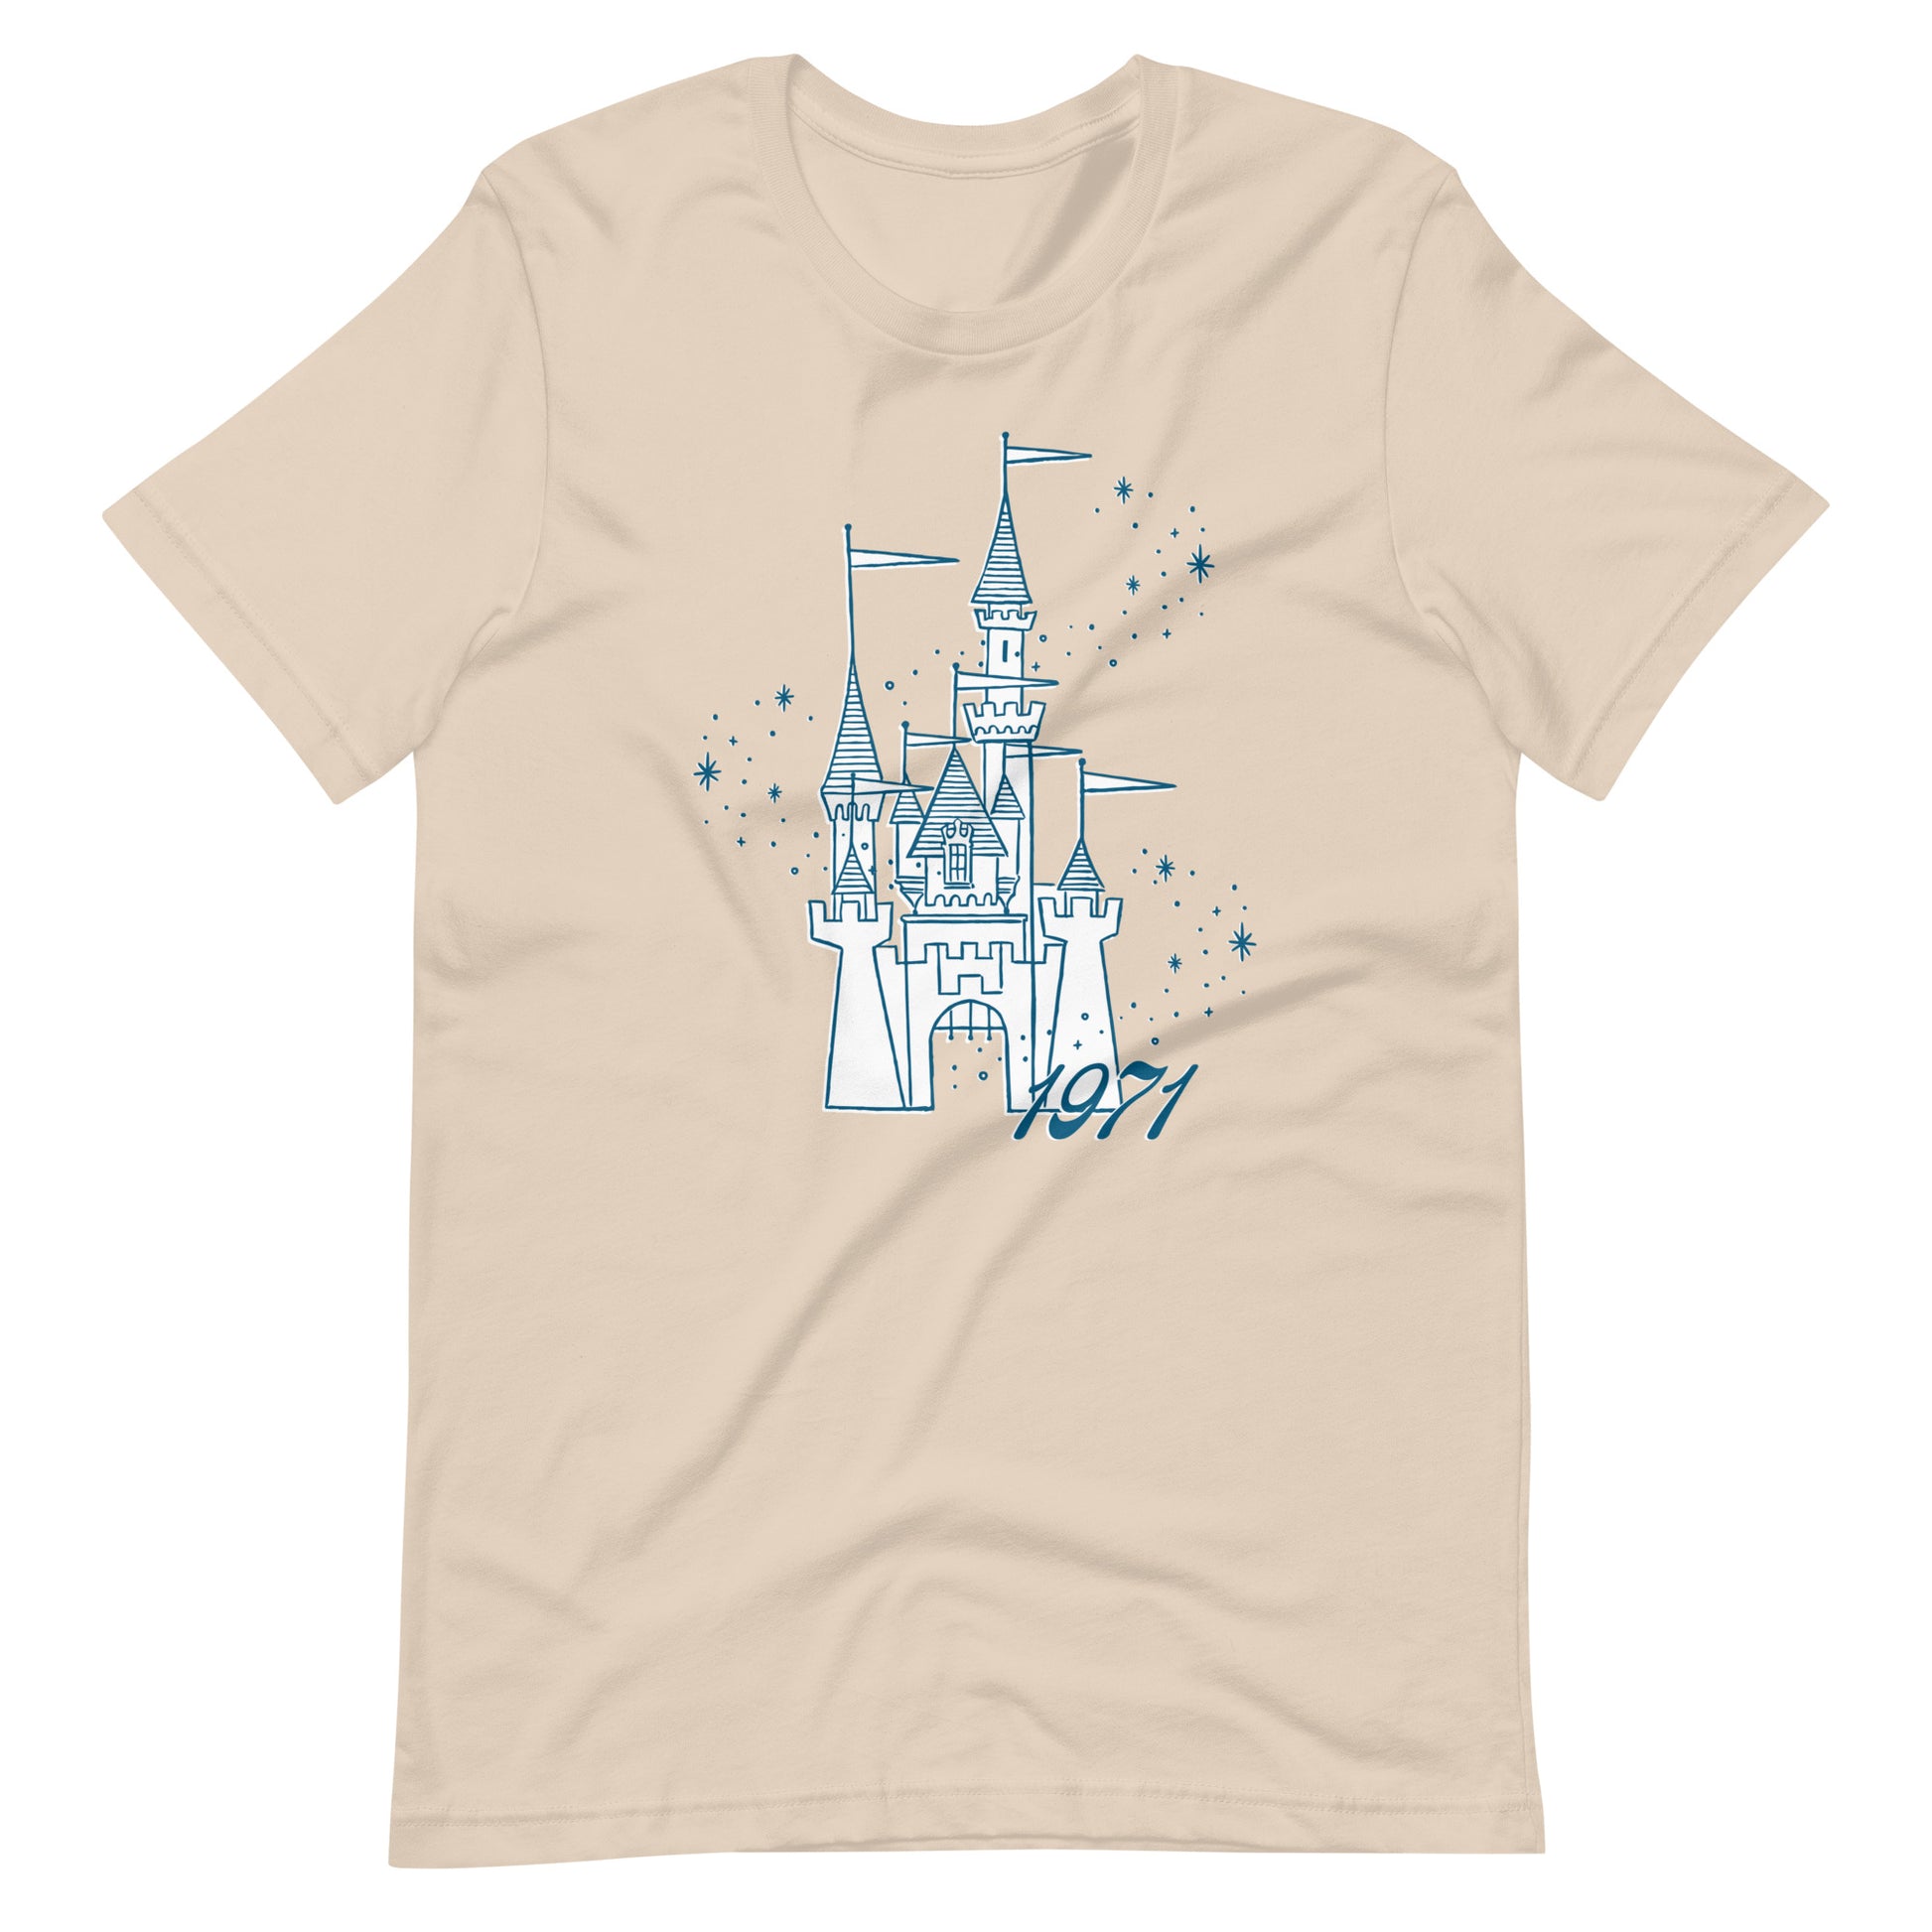 Cream shirt printed with vintage style sketch of a castle, the year 1971, and pixie dust around the castle.